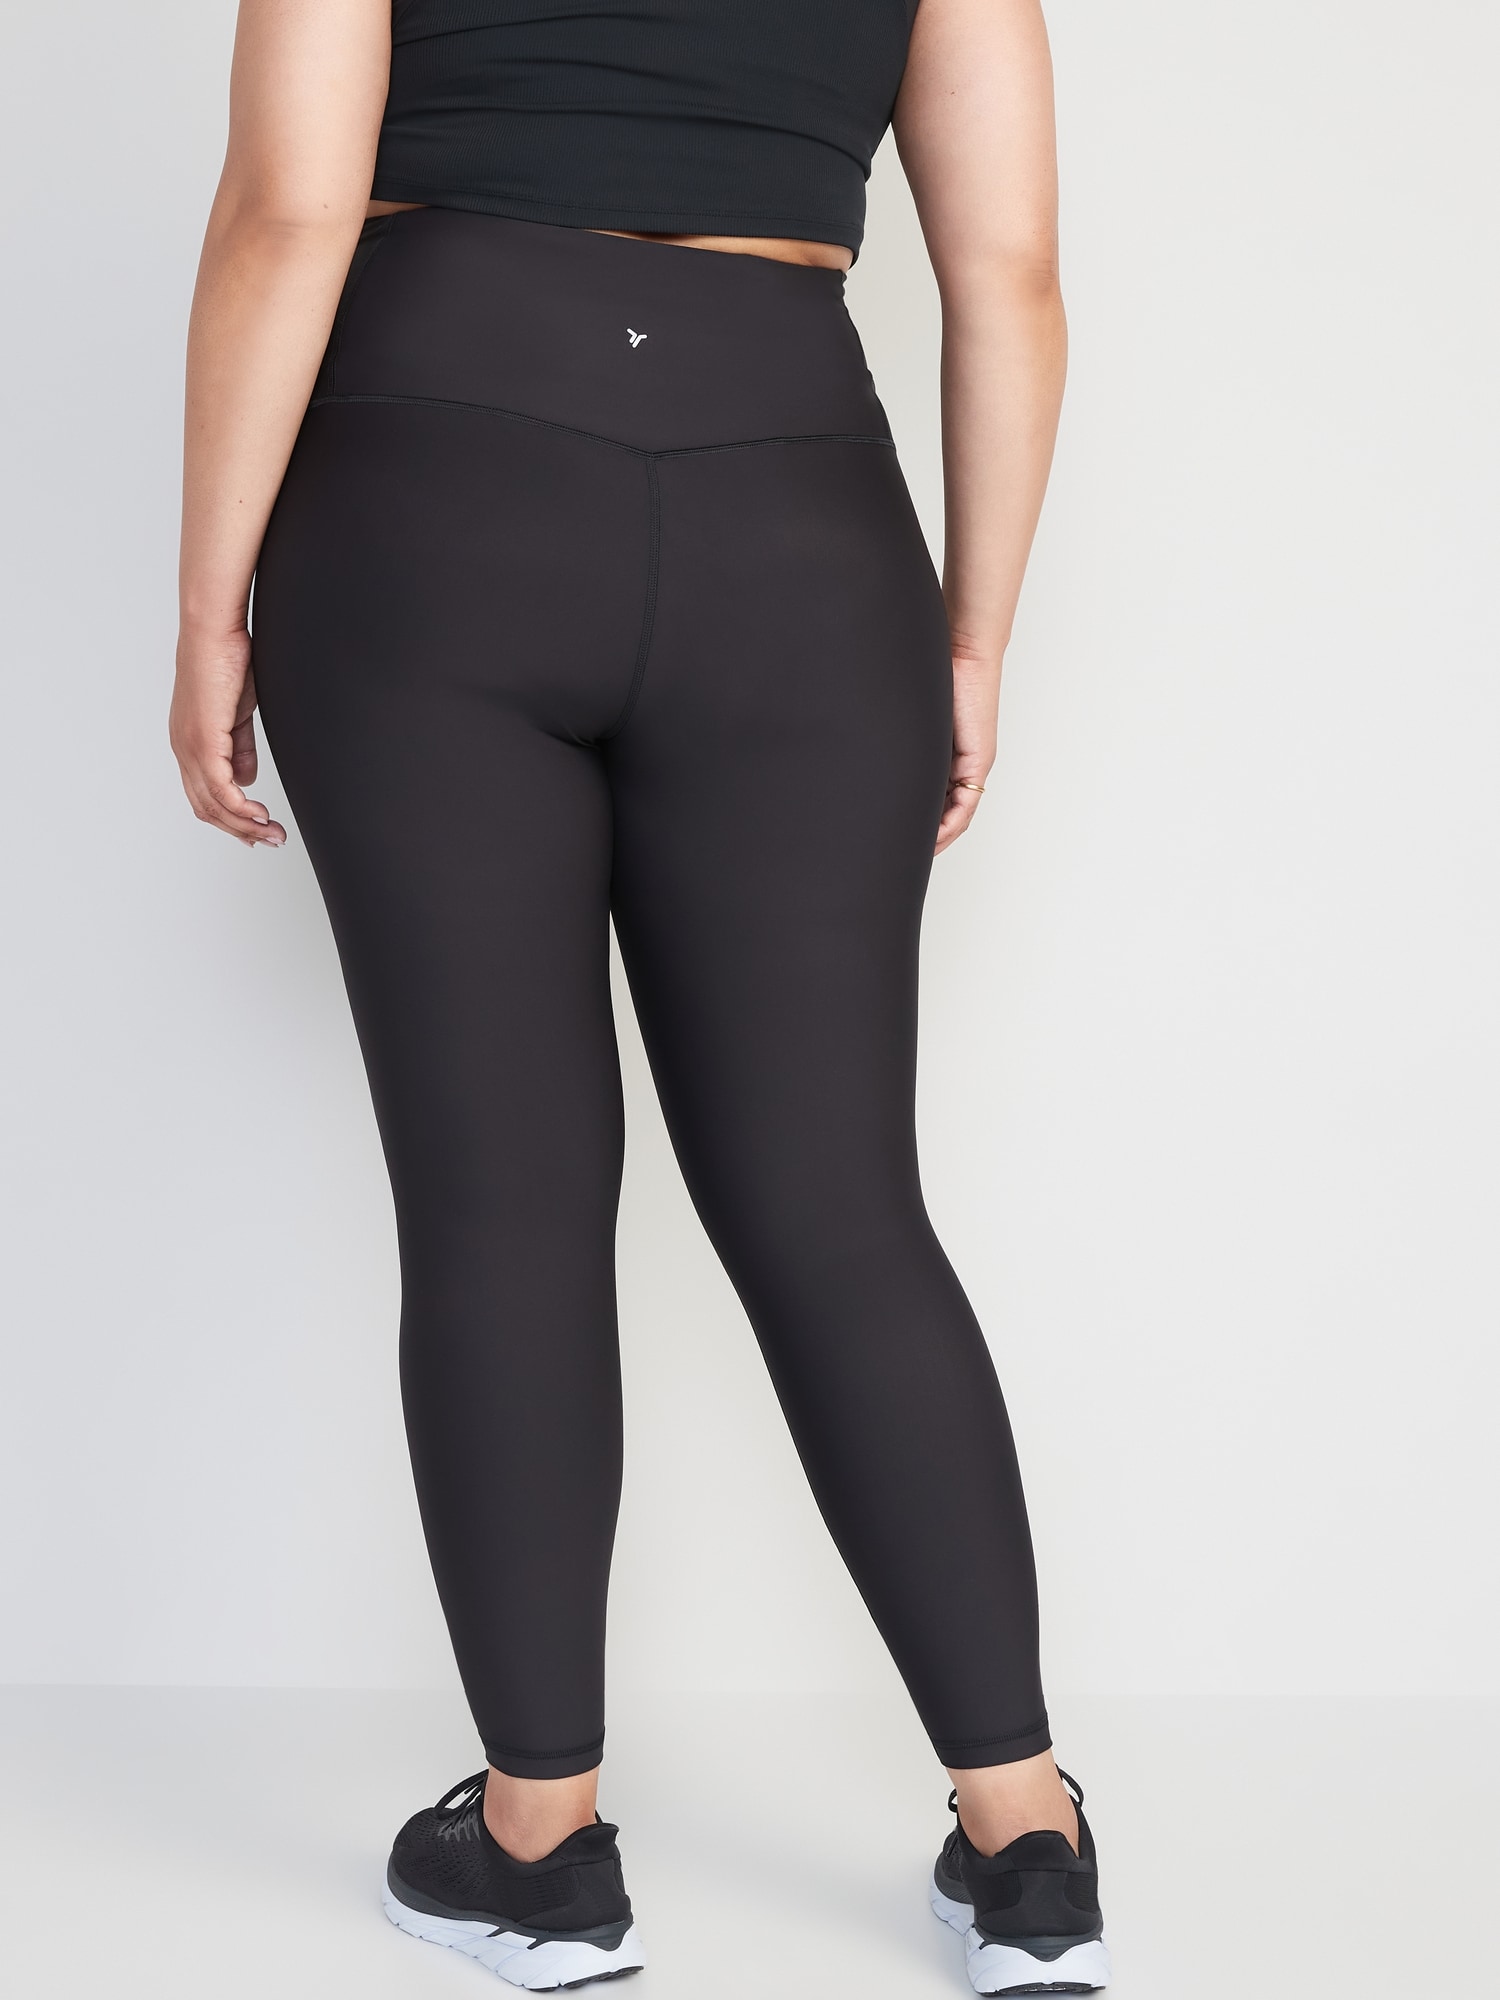 Old Navy - Extra High-Waisted PowerSoft Leggings for Women black